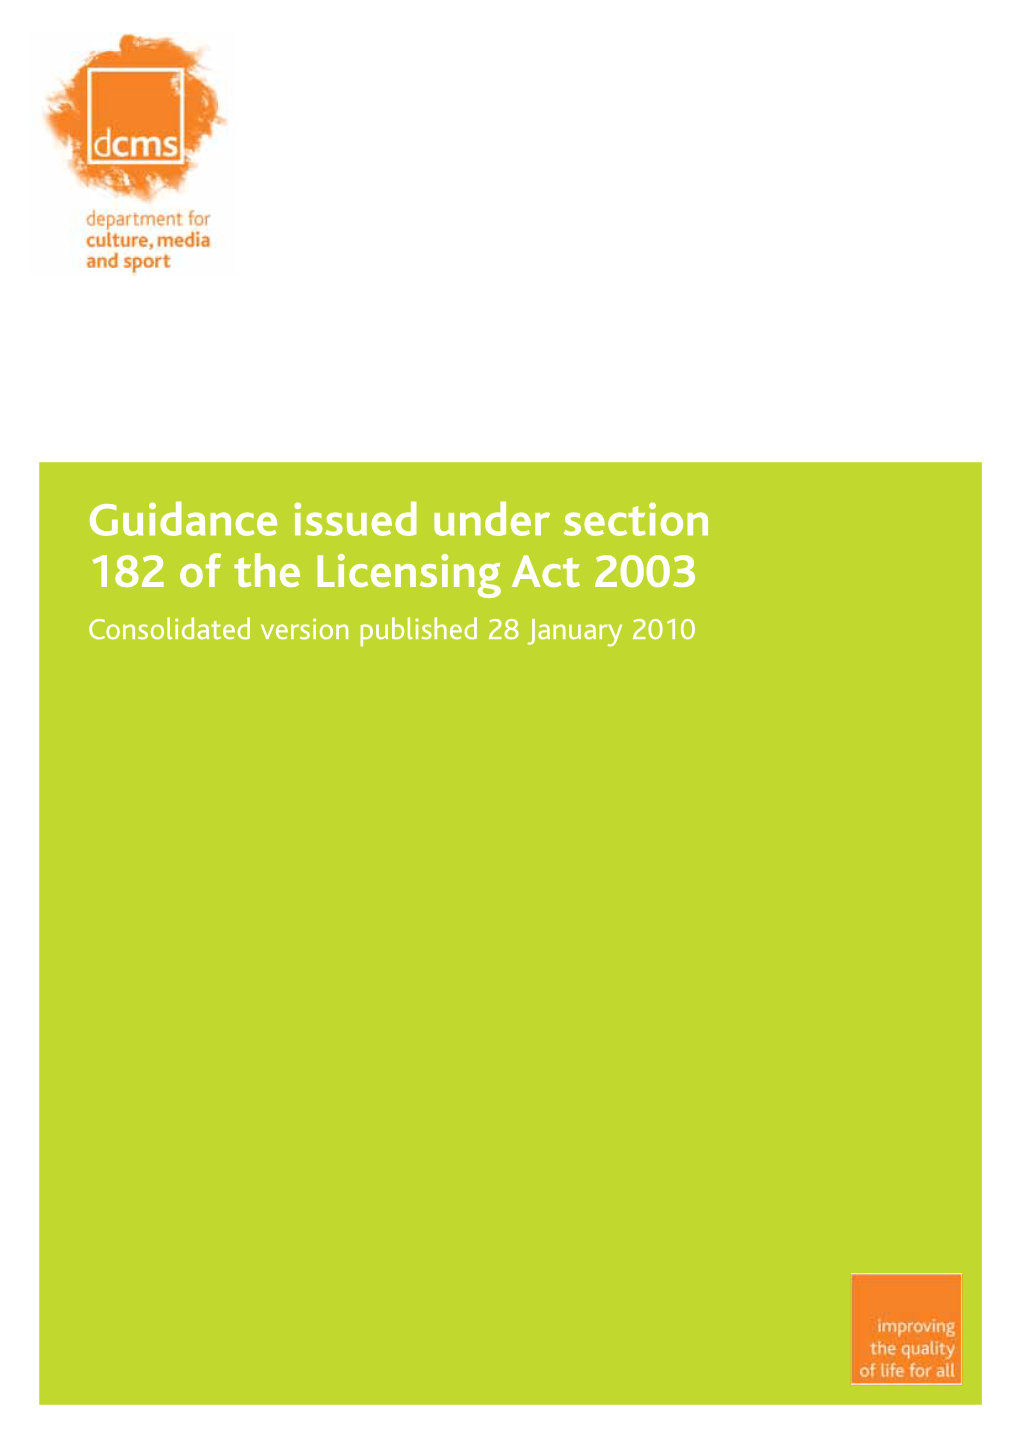 Guidance Issued Under Section 182 of the Licensing Act 2003